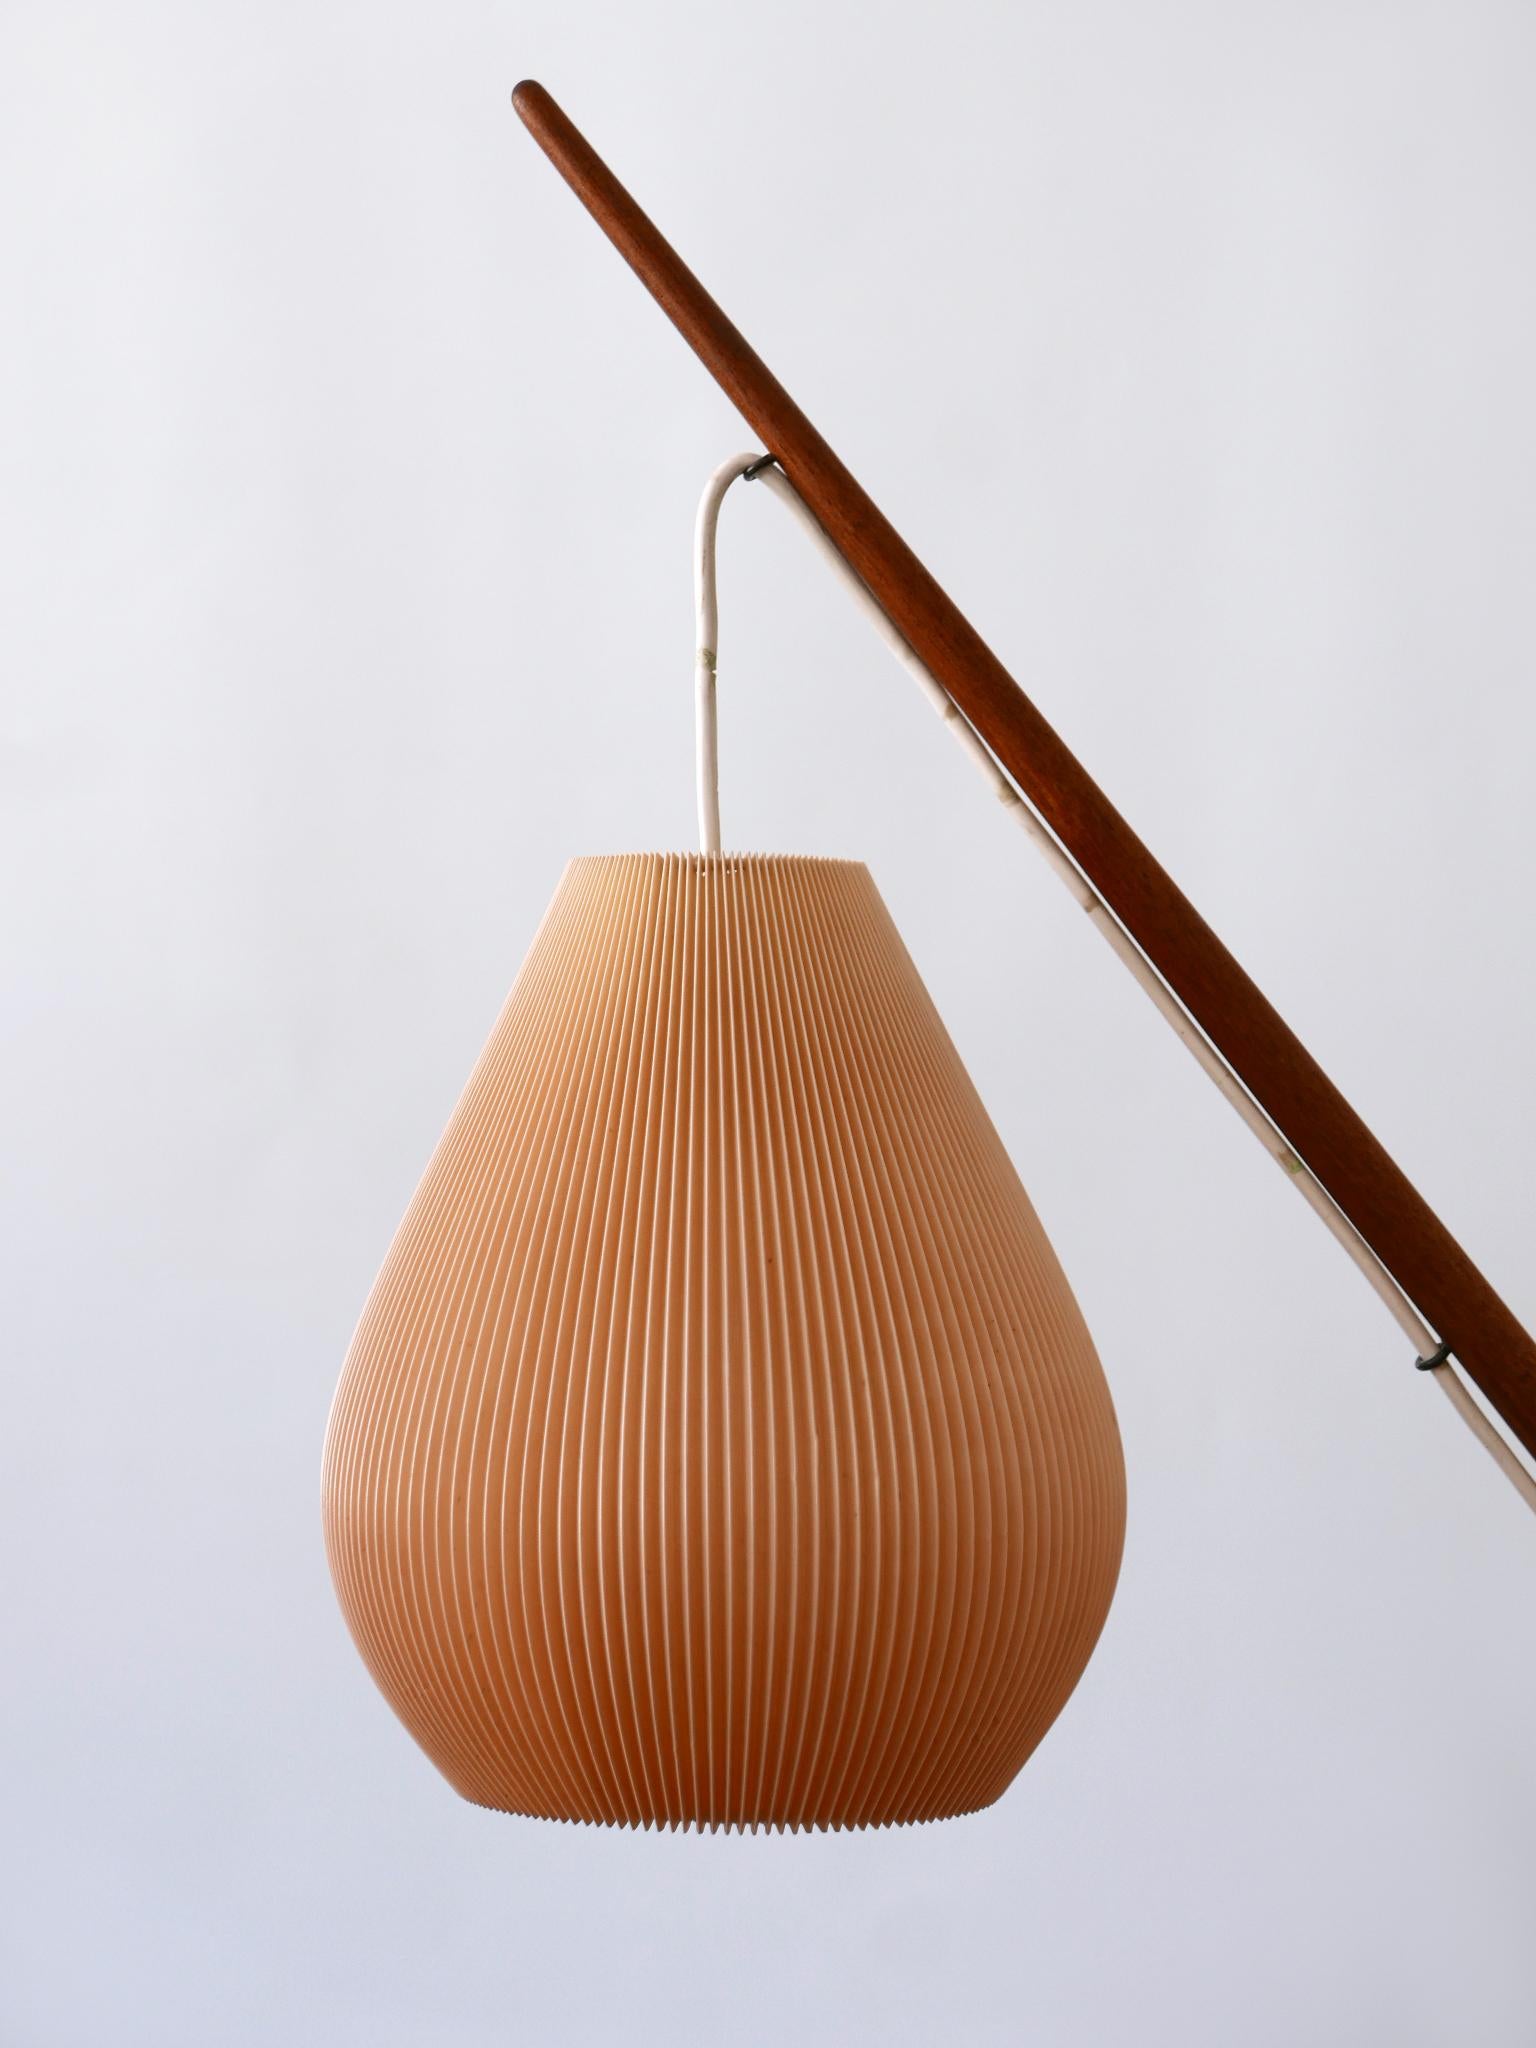 Exceptional 'Fishing Pole' Floor Lamp by Svend Aage Holm Sørensen Denmark 1950s For Sale 7